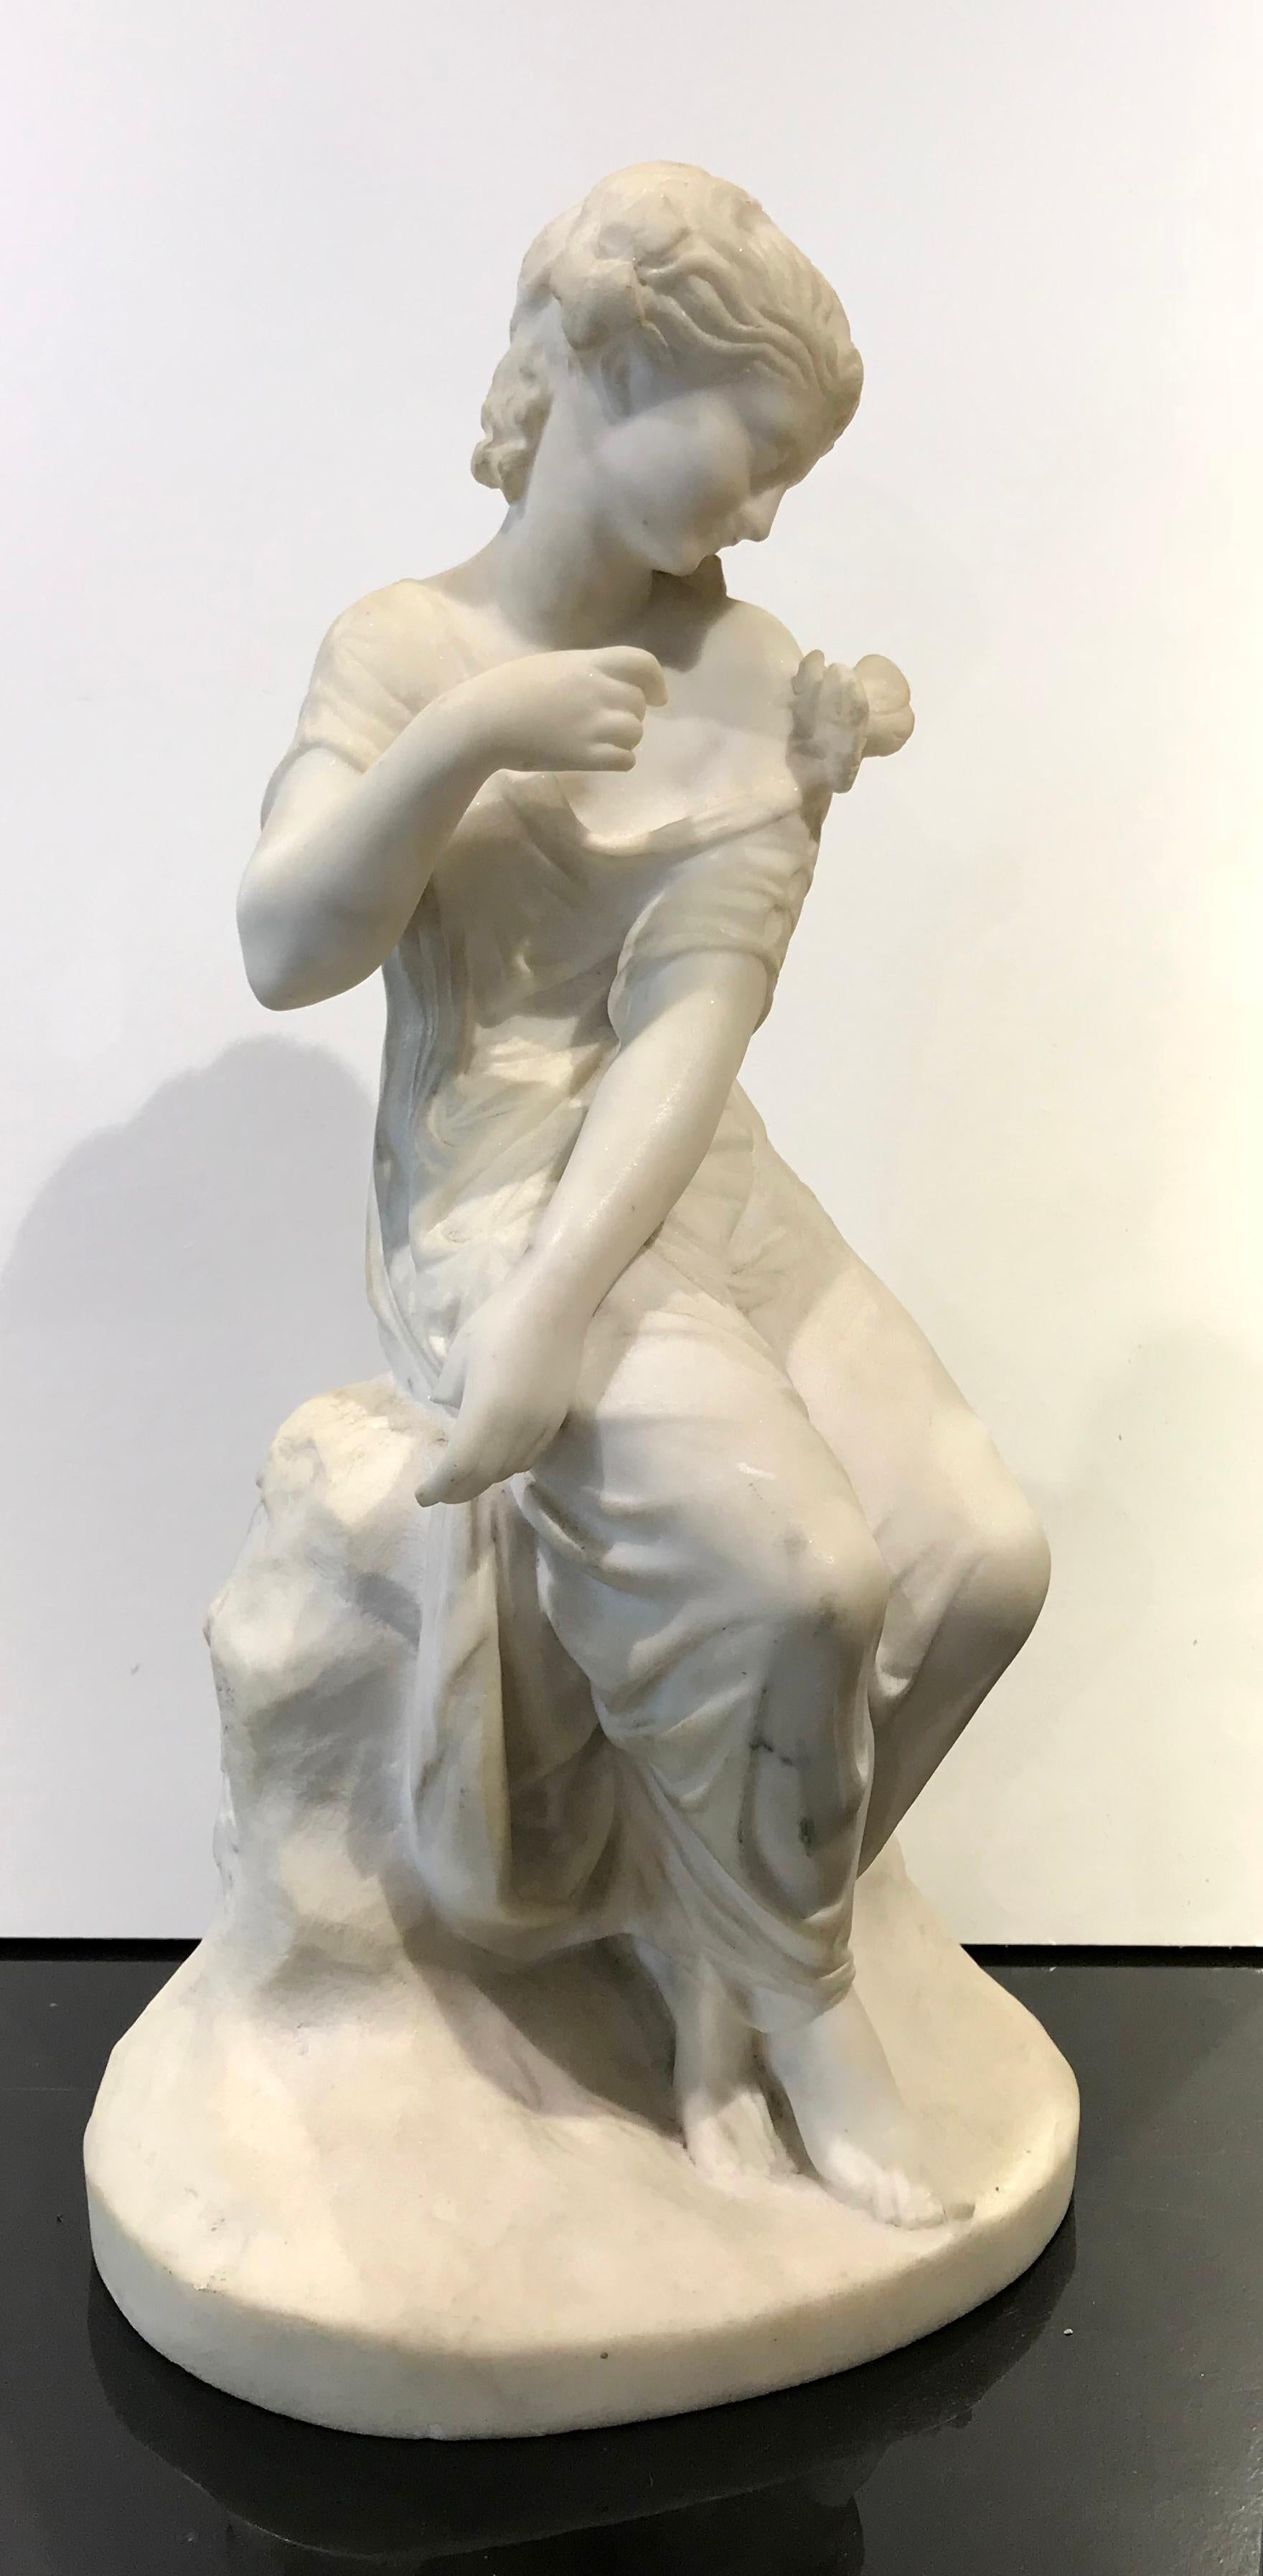 Neoclassical 19th Century French Marble Sculpture of Psyche by James Pradier Signed